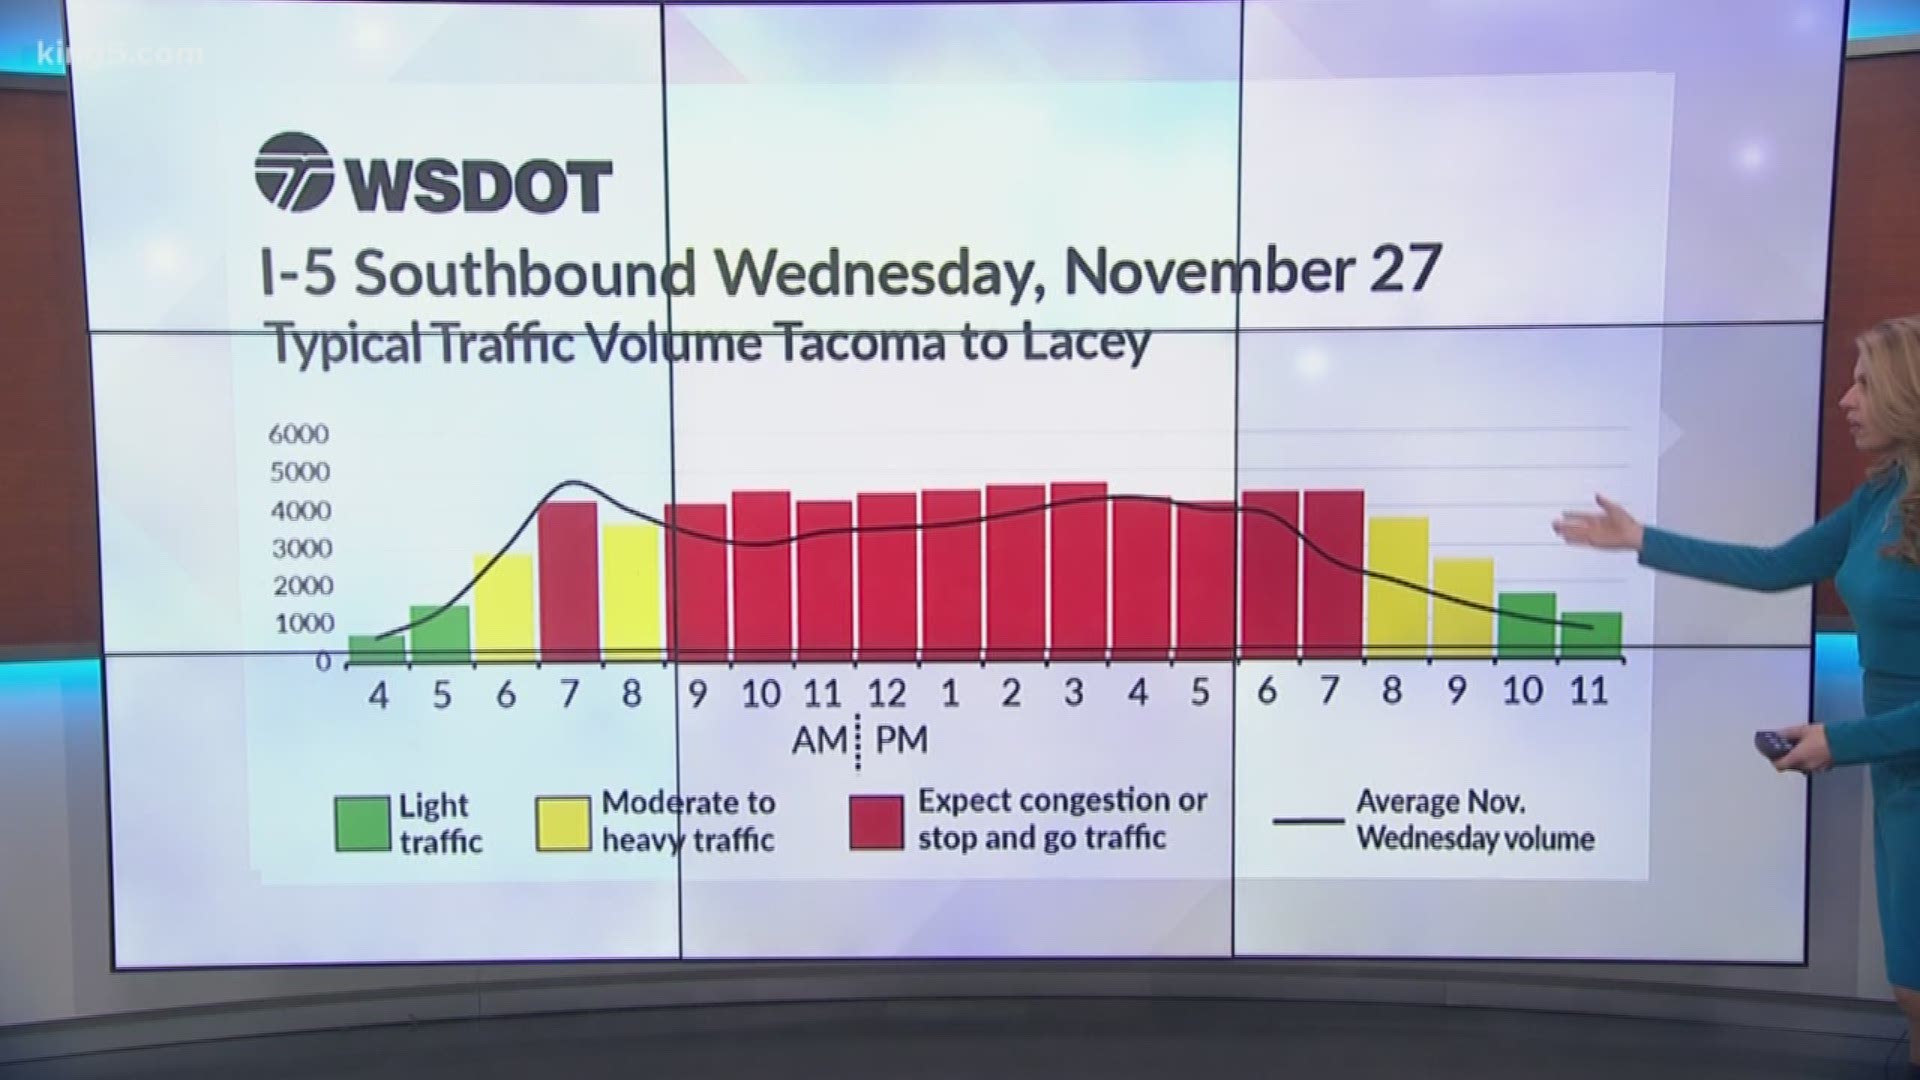 The busiest travel day will be the Wednesday before Thanksgiving.